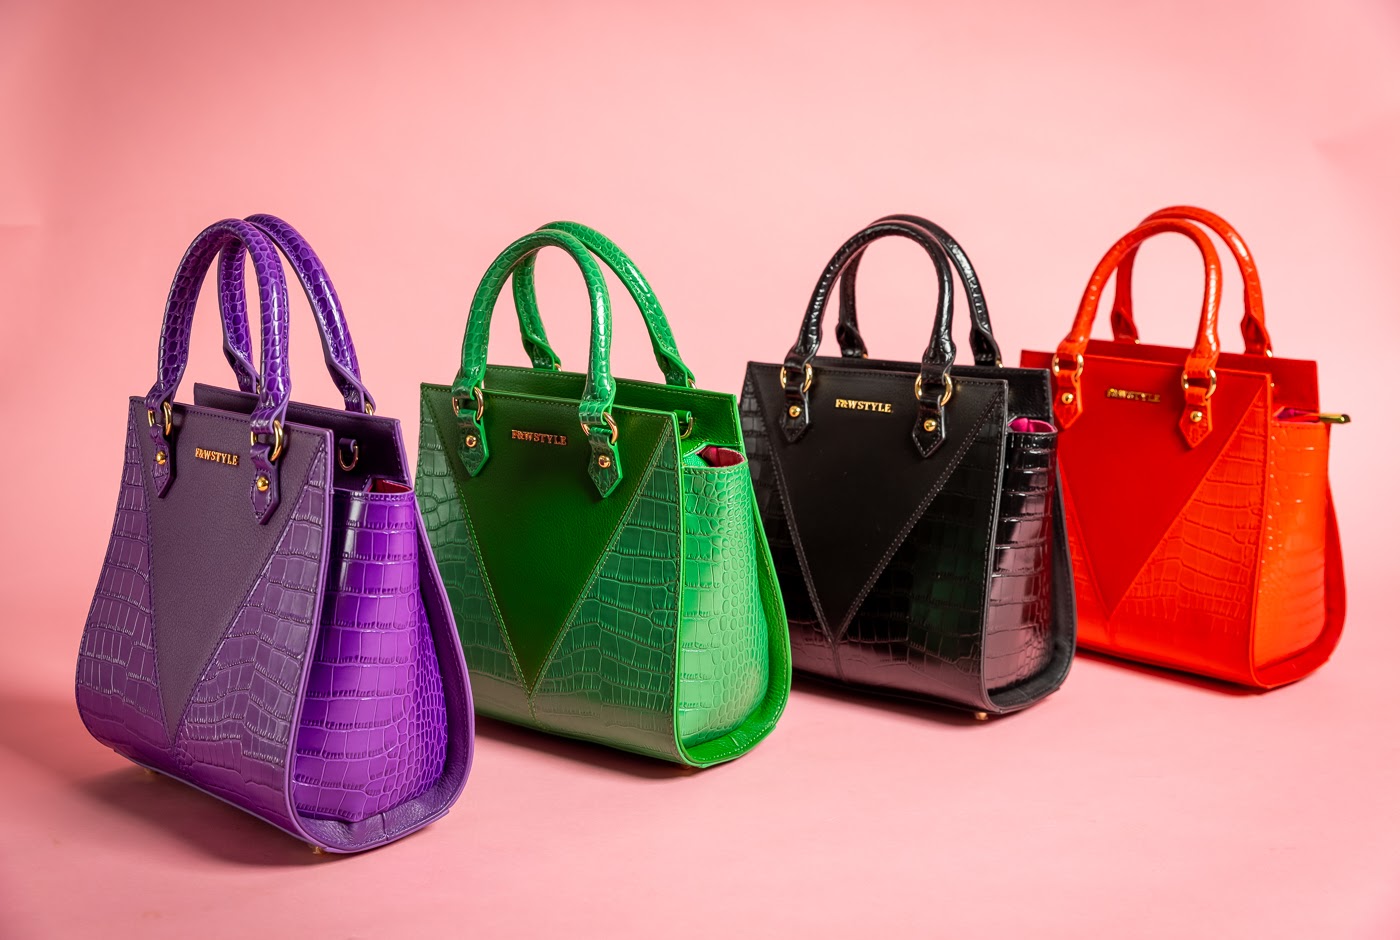 Alexandria Allis' 'F&W STYLE' Just Dropped a Handbag Collection in ...